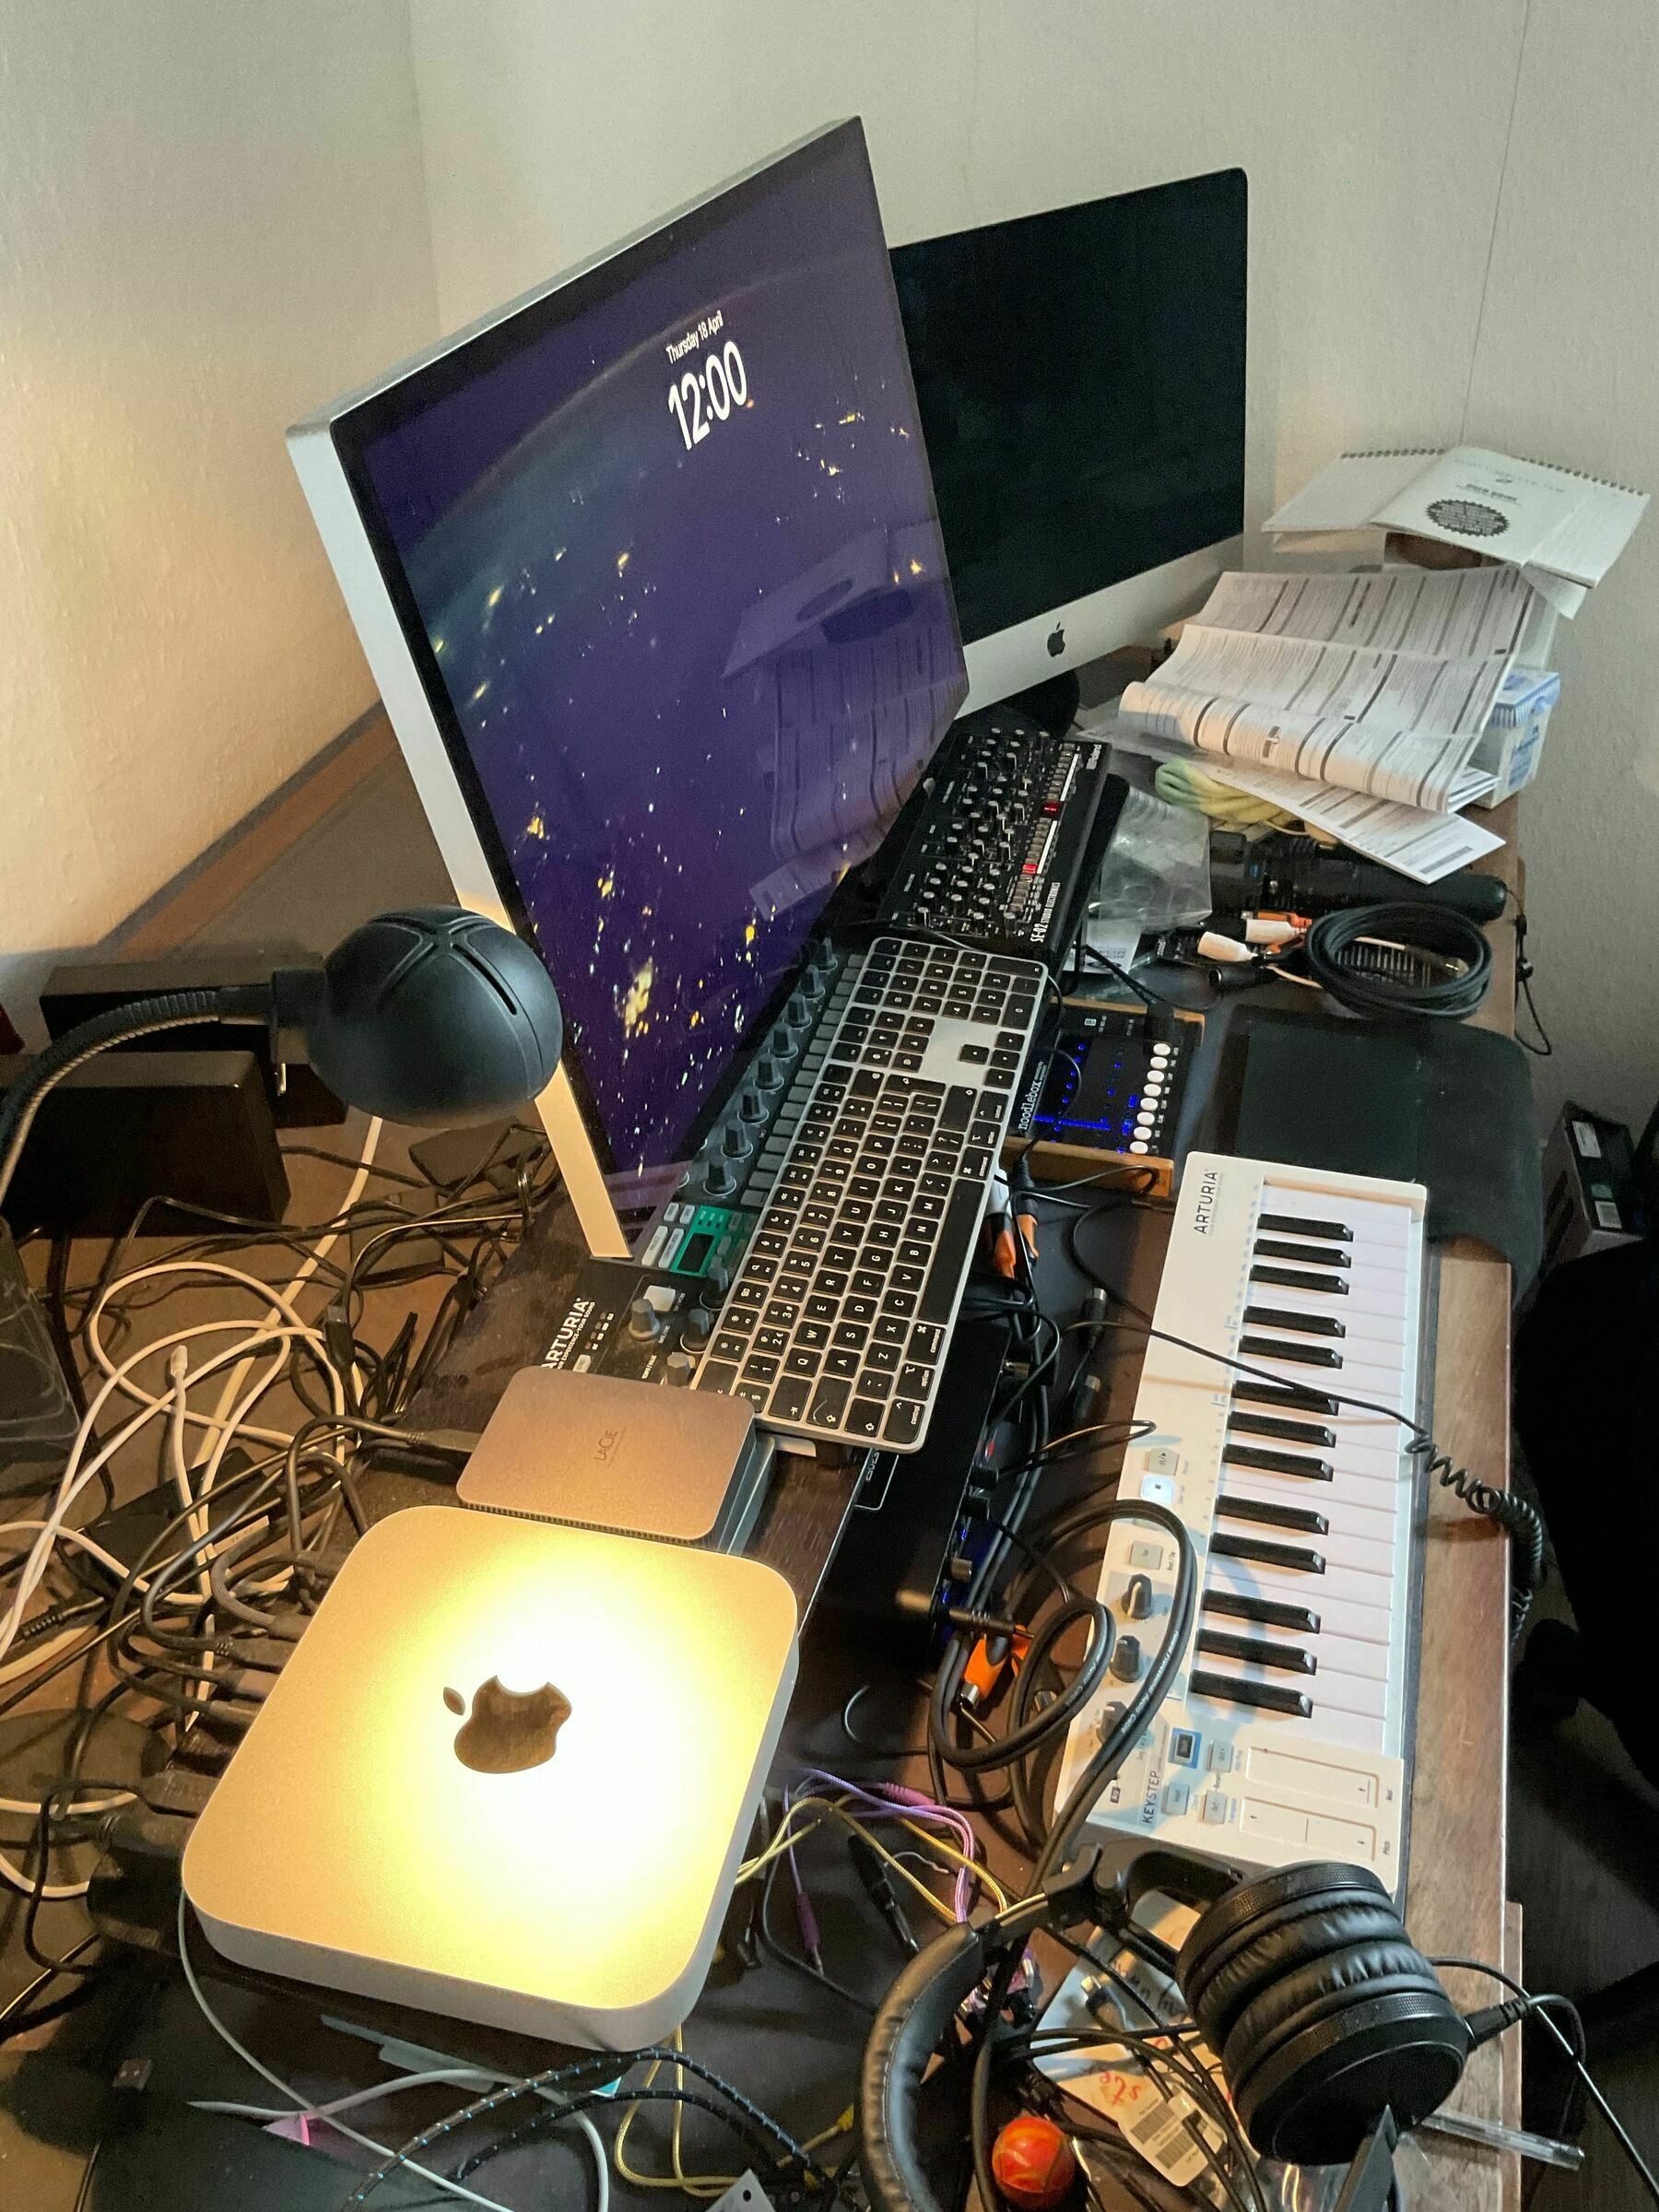  A cluttered desk with two computers, a tangle of wiring, musical keyboards and devices etc.